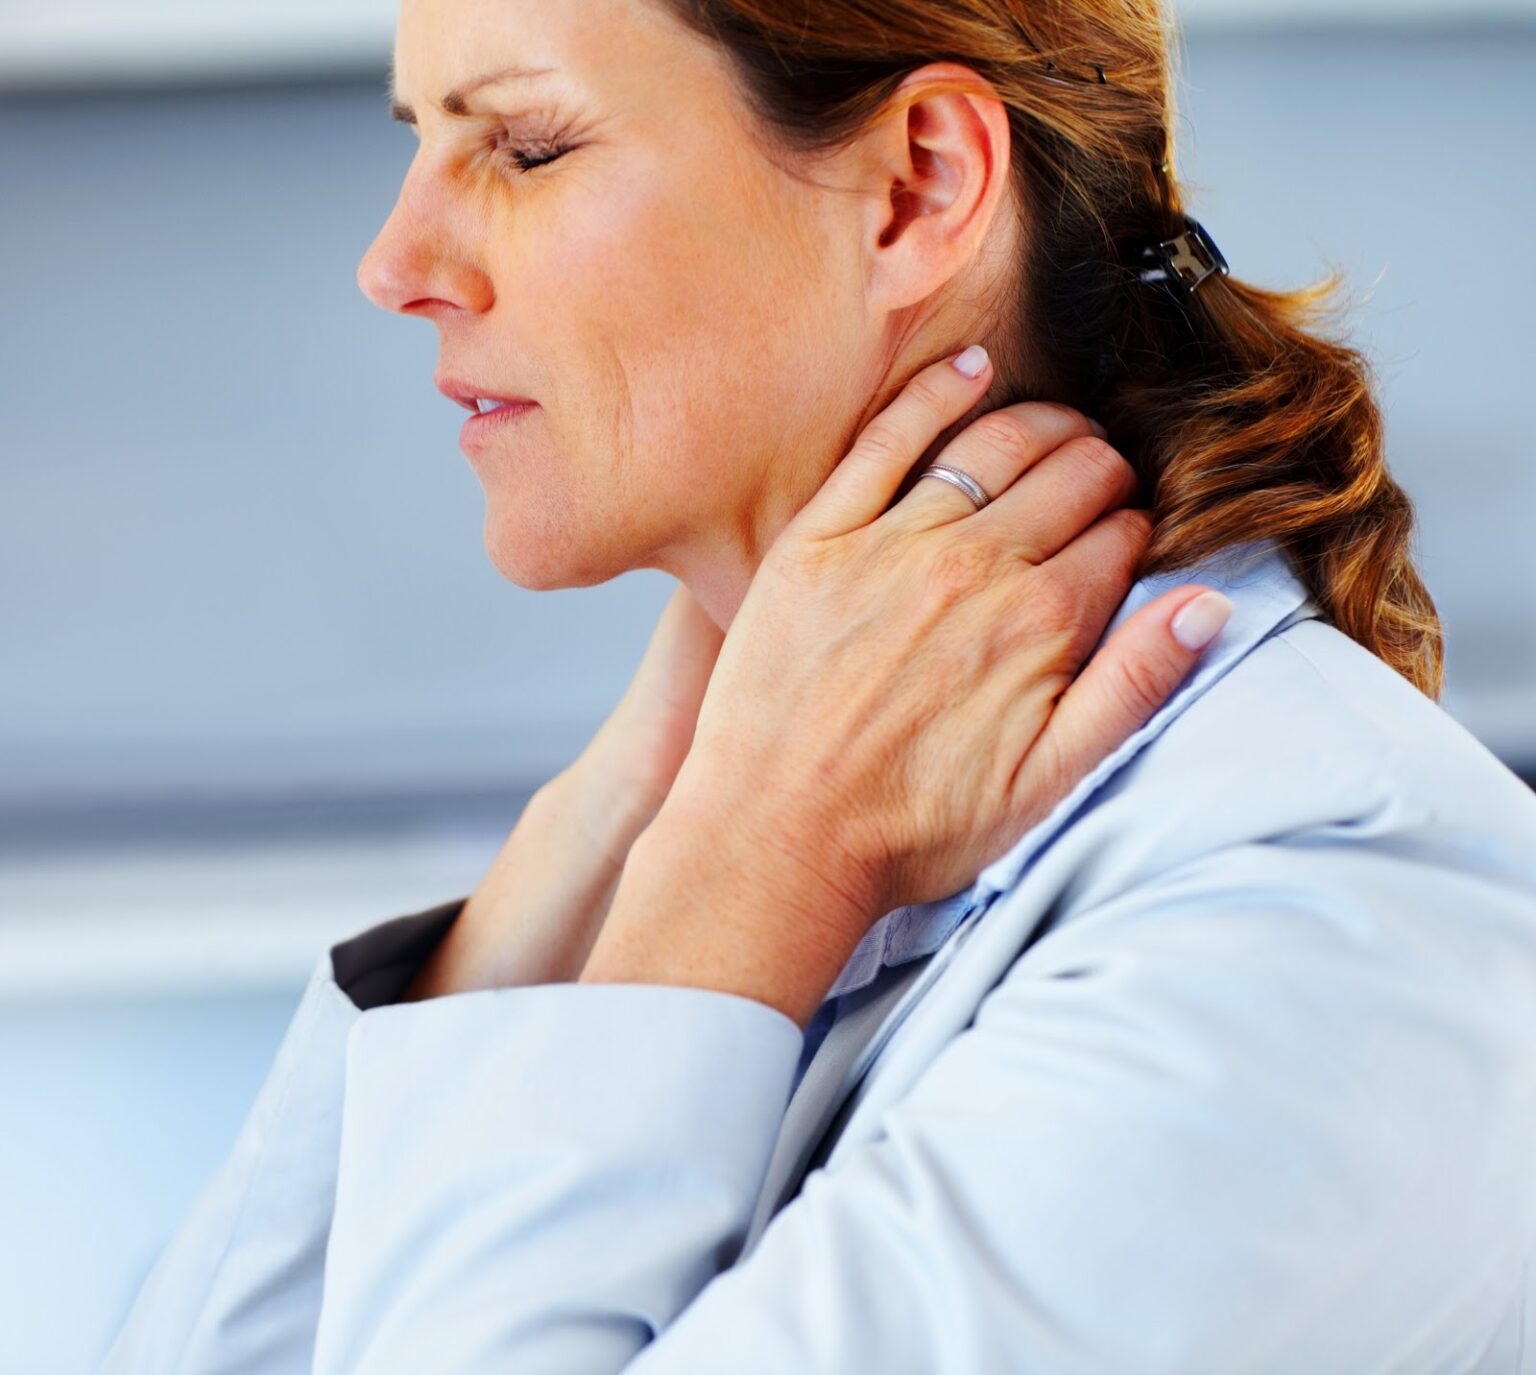 Spinal Rehab Neck Pain And Office Workers